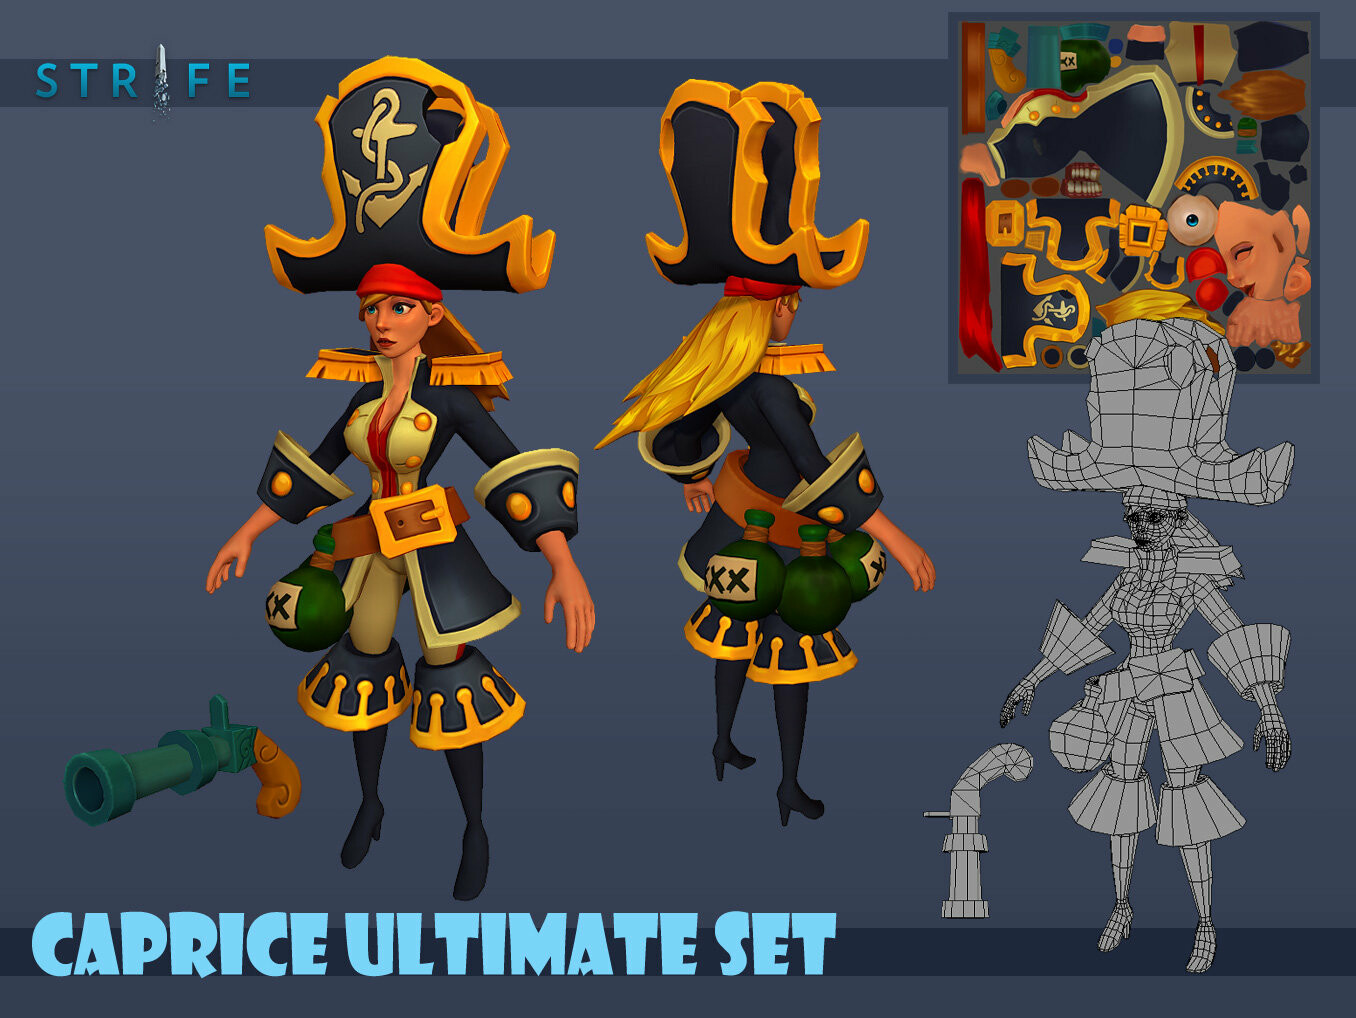 Caprice Ultimate Set 
8k Polygons 
Diffuse, Normal, Specular